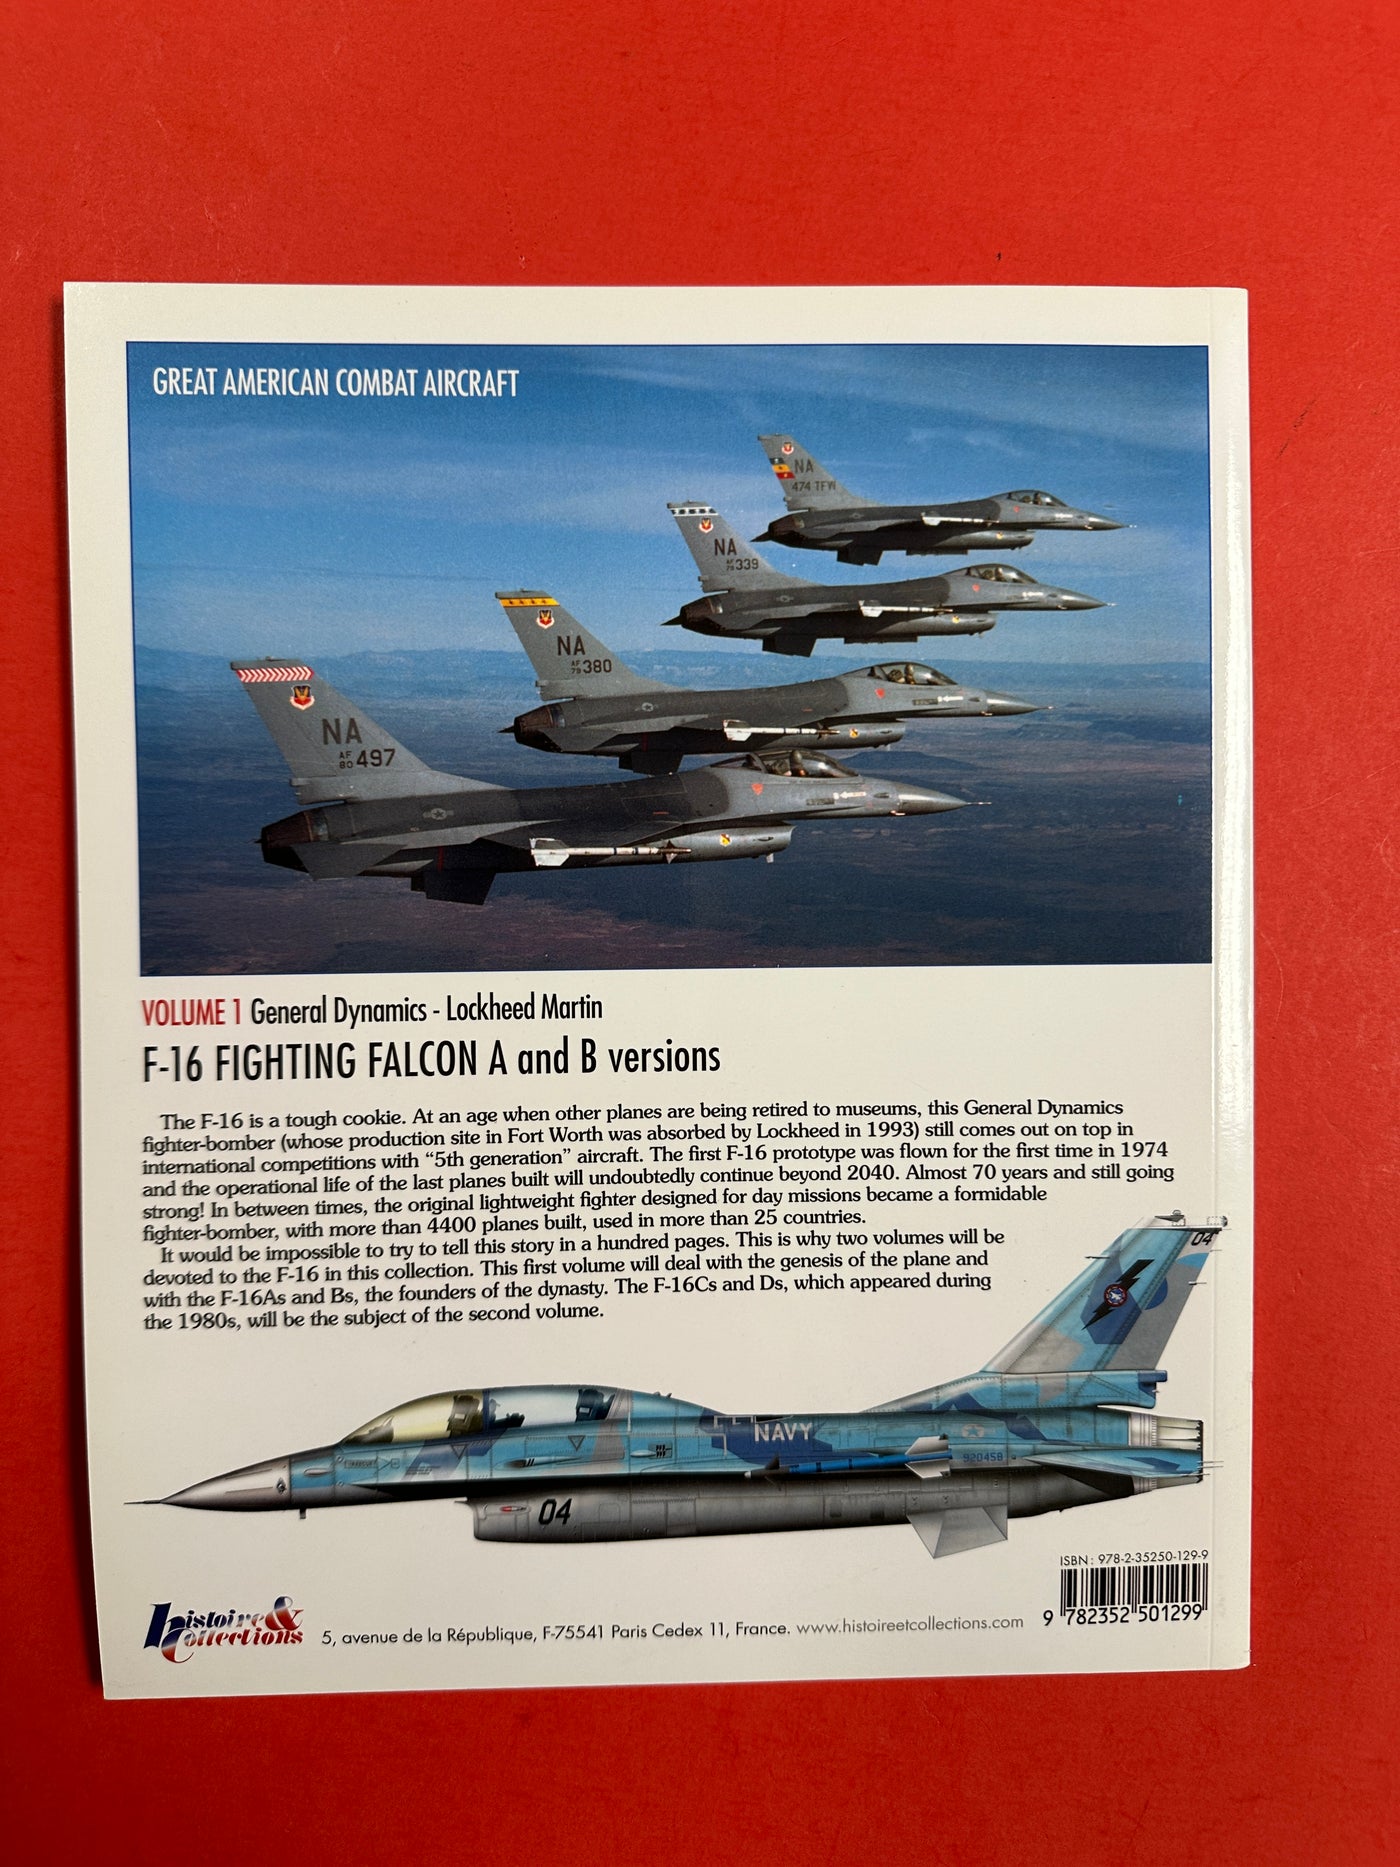 General Dynamics / Lockheed-Martin F-16 A and B Versions, Vol. 1: Fighting Falcon (Great American Combat Aircraft) Paperback – 2010